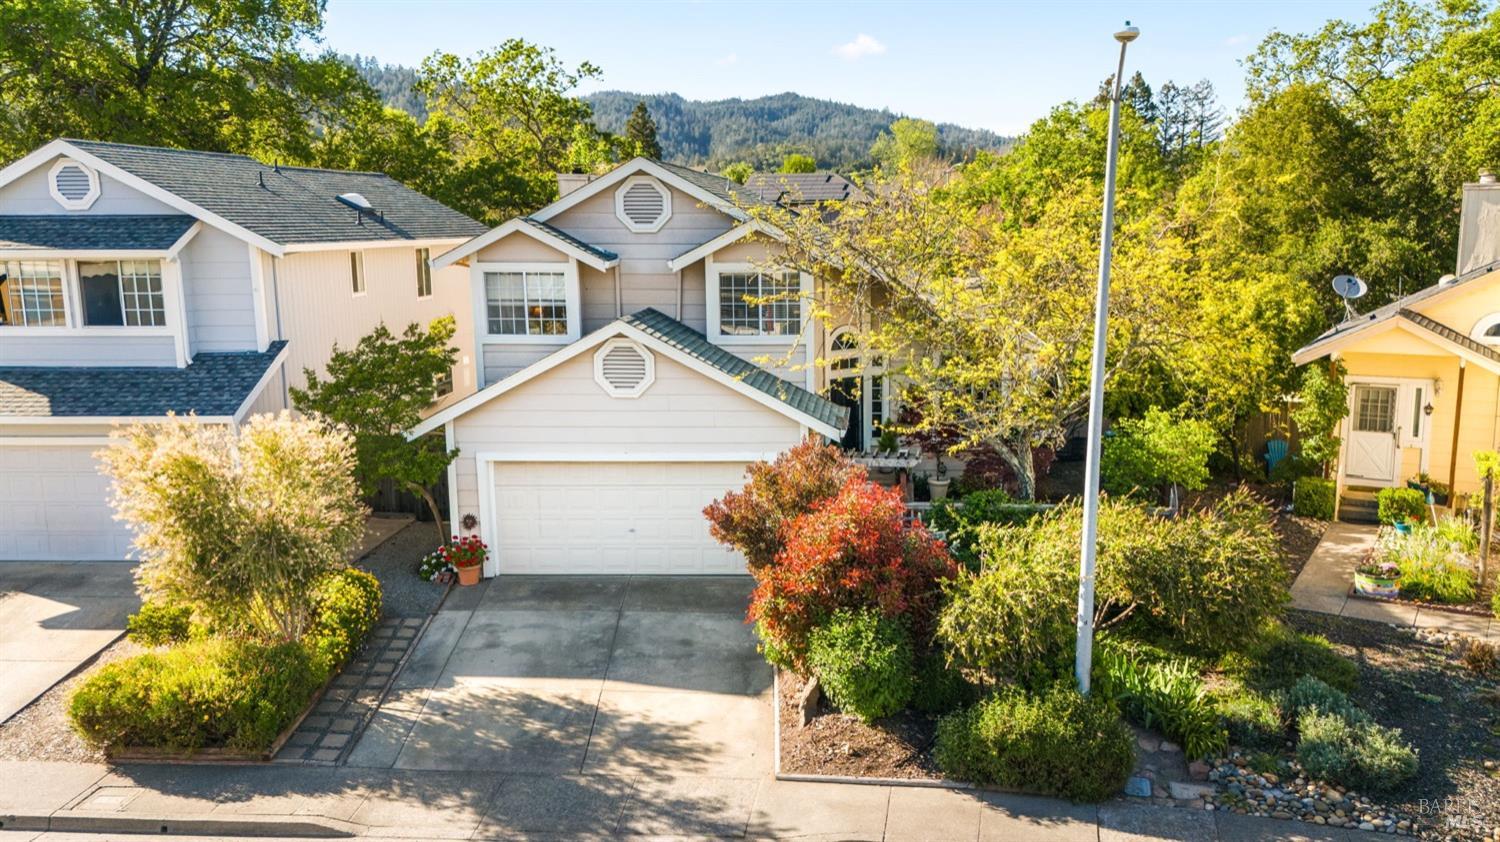 Photo of 118 Marguerite Ln in Cloverdale, CA